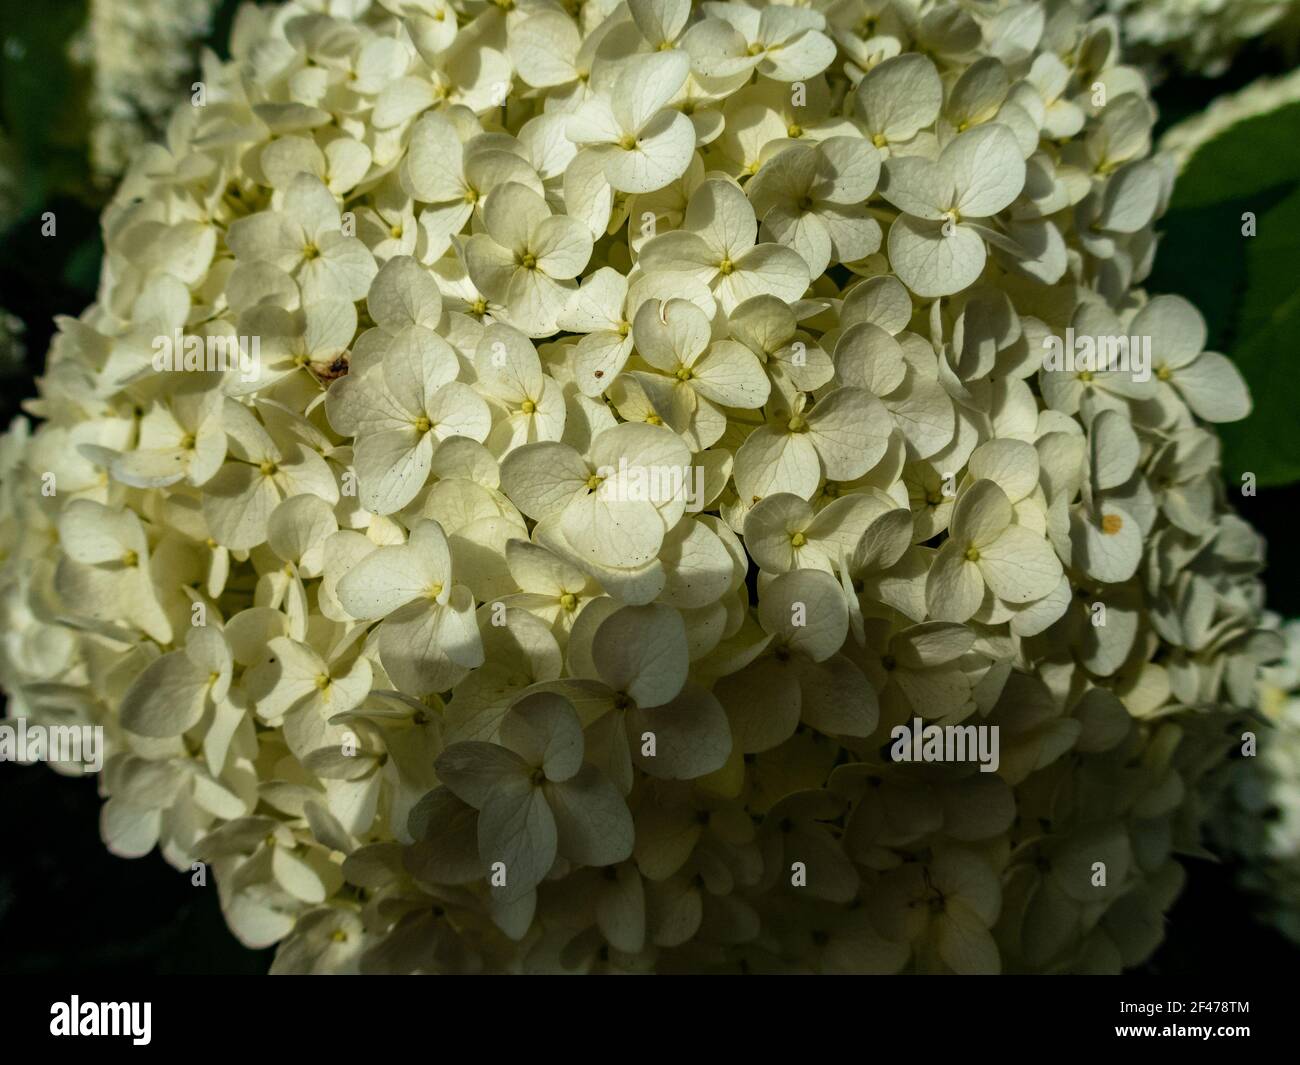 Wonderful blooming white Hydrangea arborescens, commonly known as smooth hydrangea, wild hydrangea in a garden. Closeup of White Hydrangea Flowers in Stock Photo